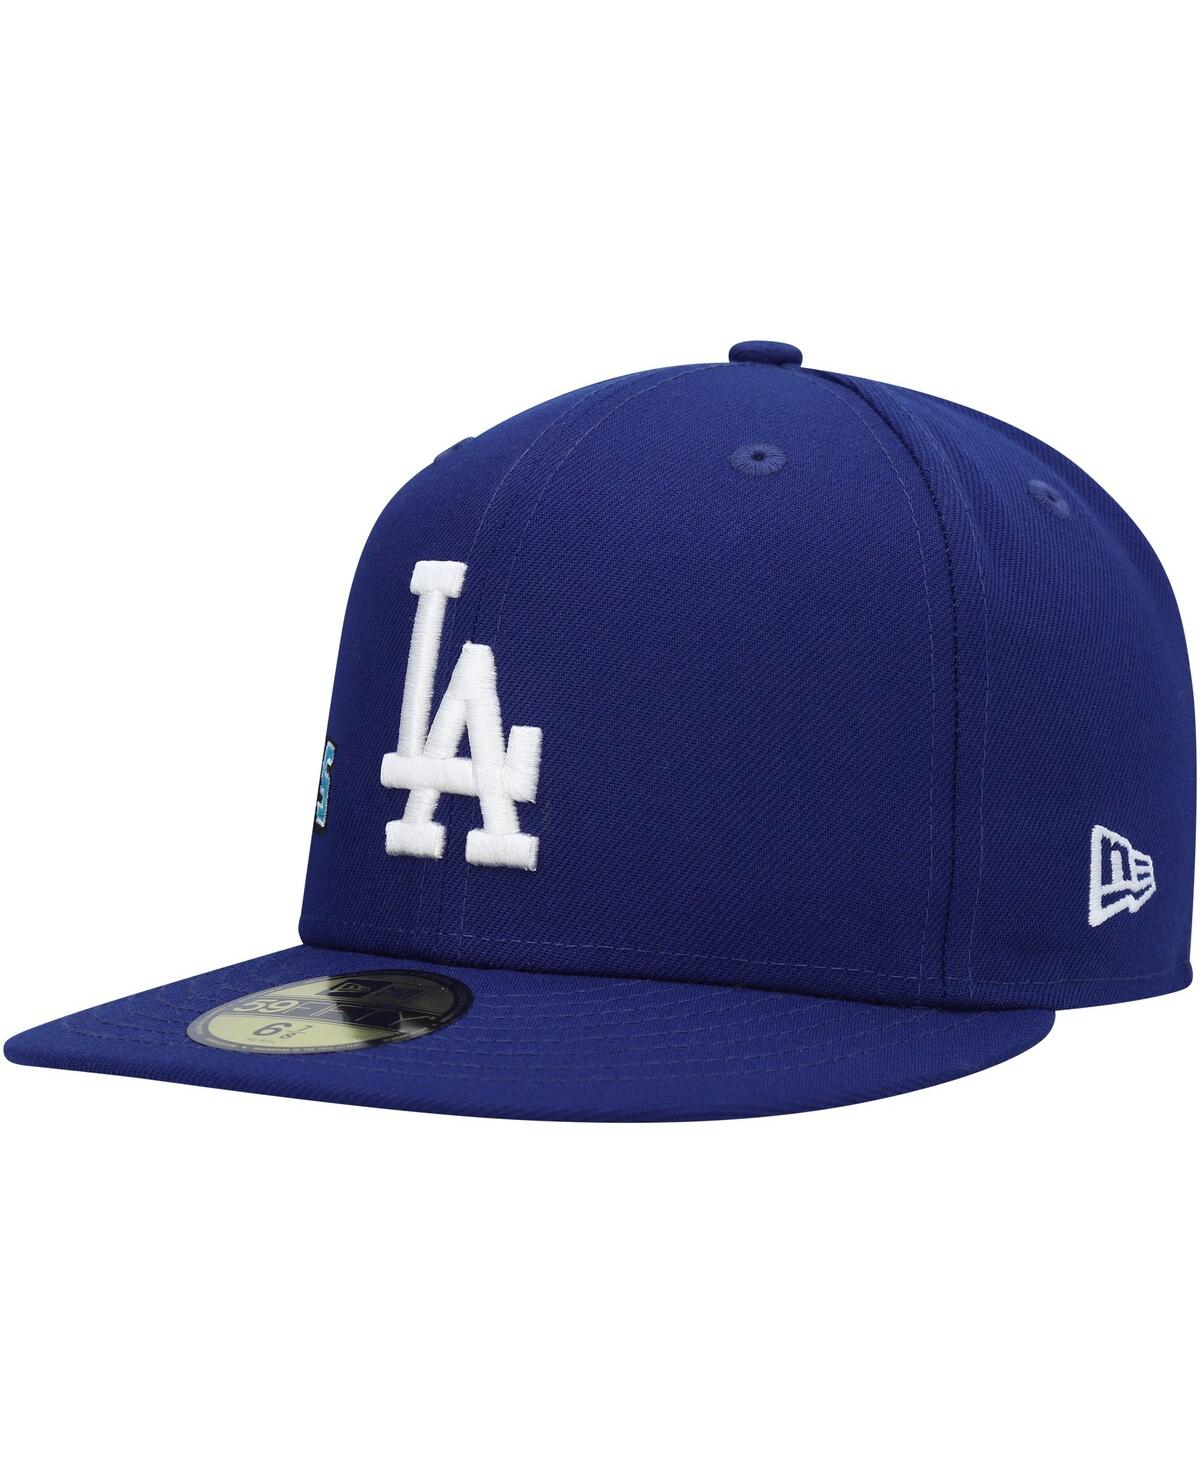 Shop New Era Men's  Royal Los Angeles Dodgers Stateview 59fifty Fitted Hat